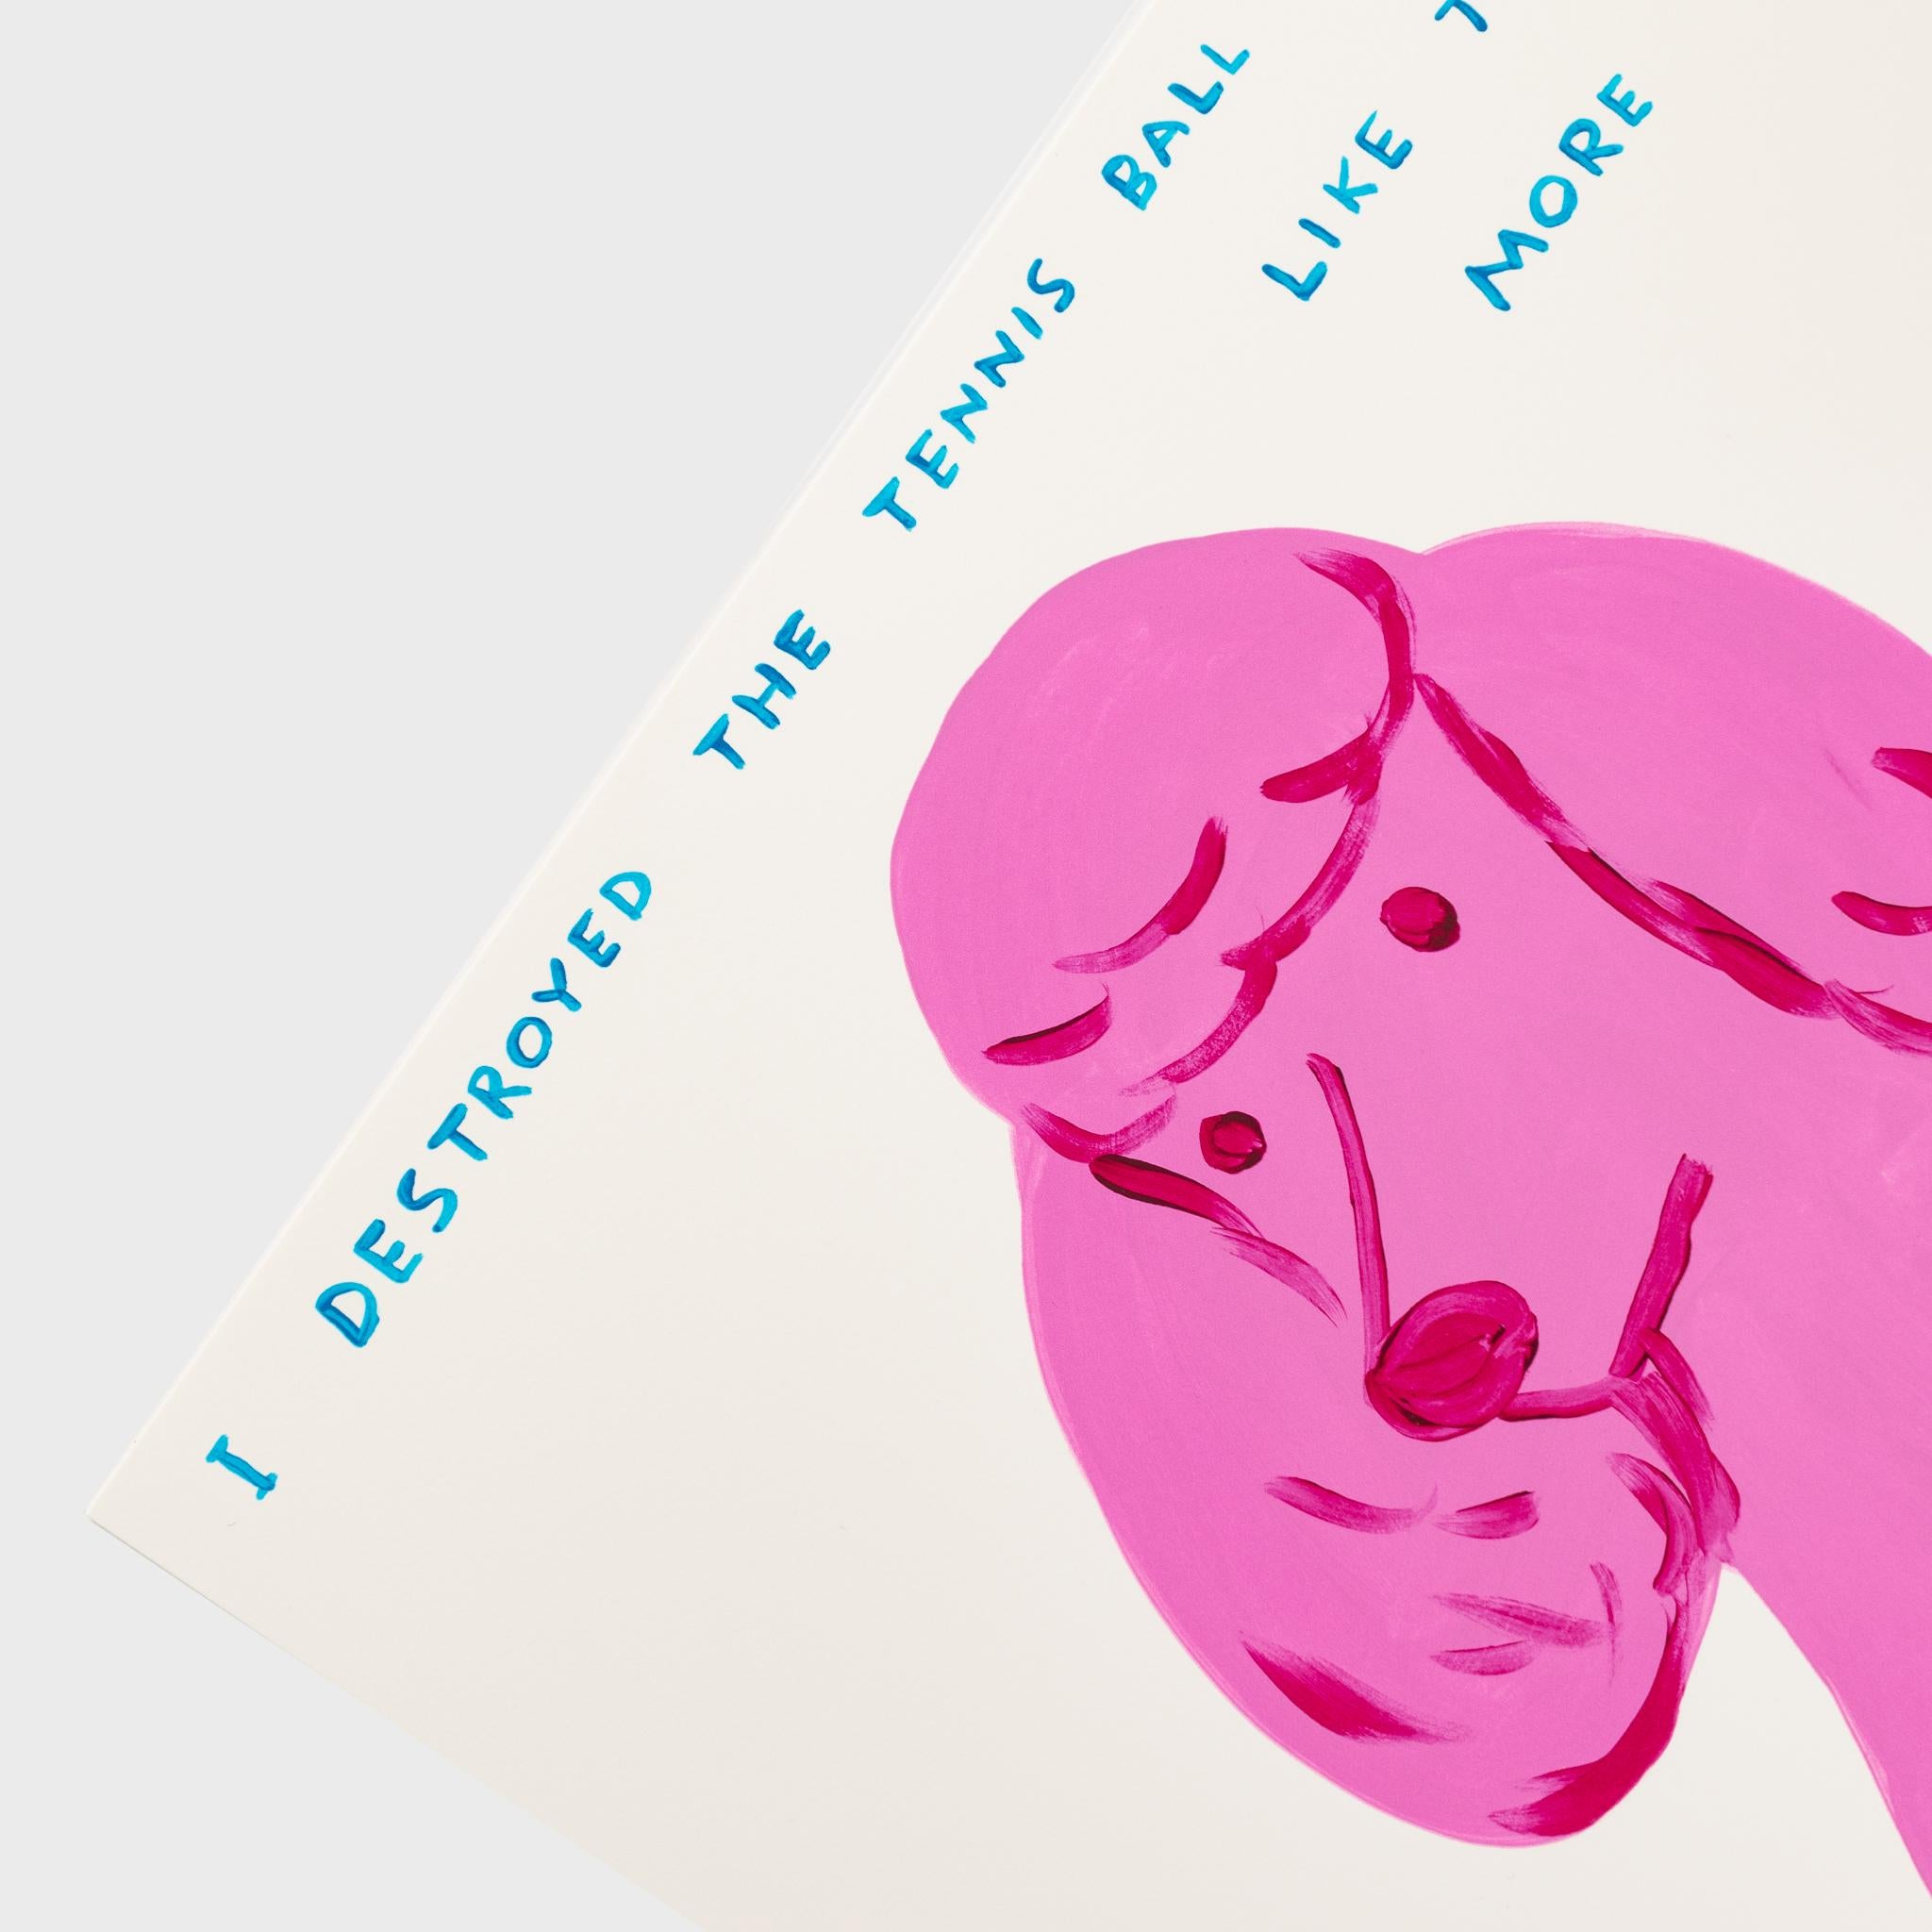 I Destroyed The Tennis Ball And I Would Like To Destroy More - Print by David Shrigley